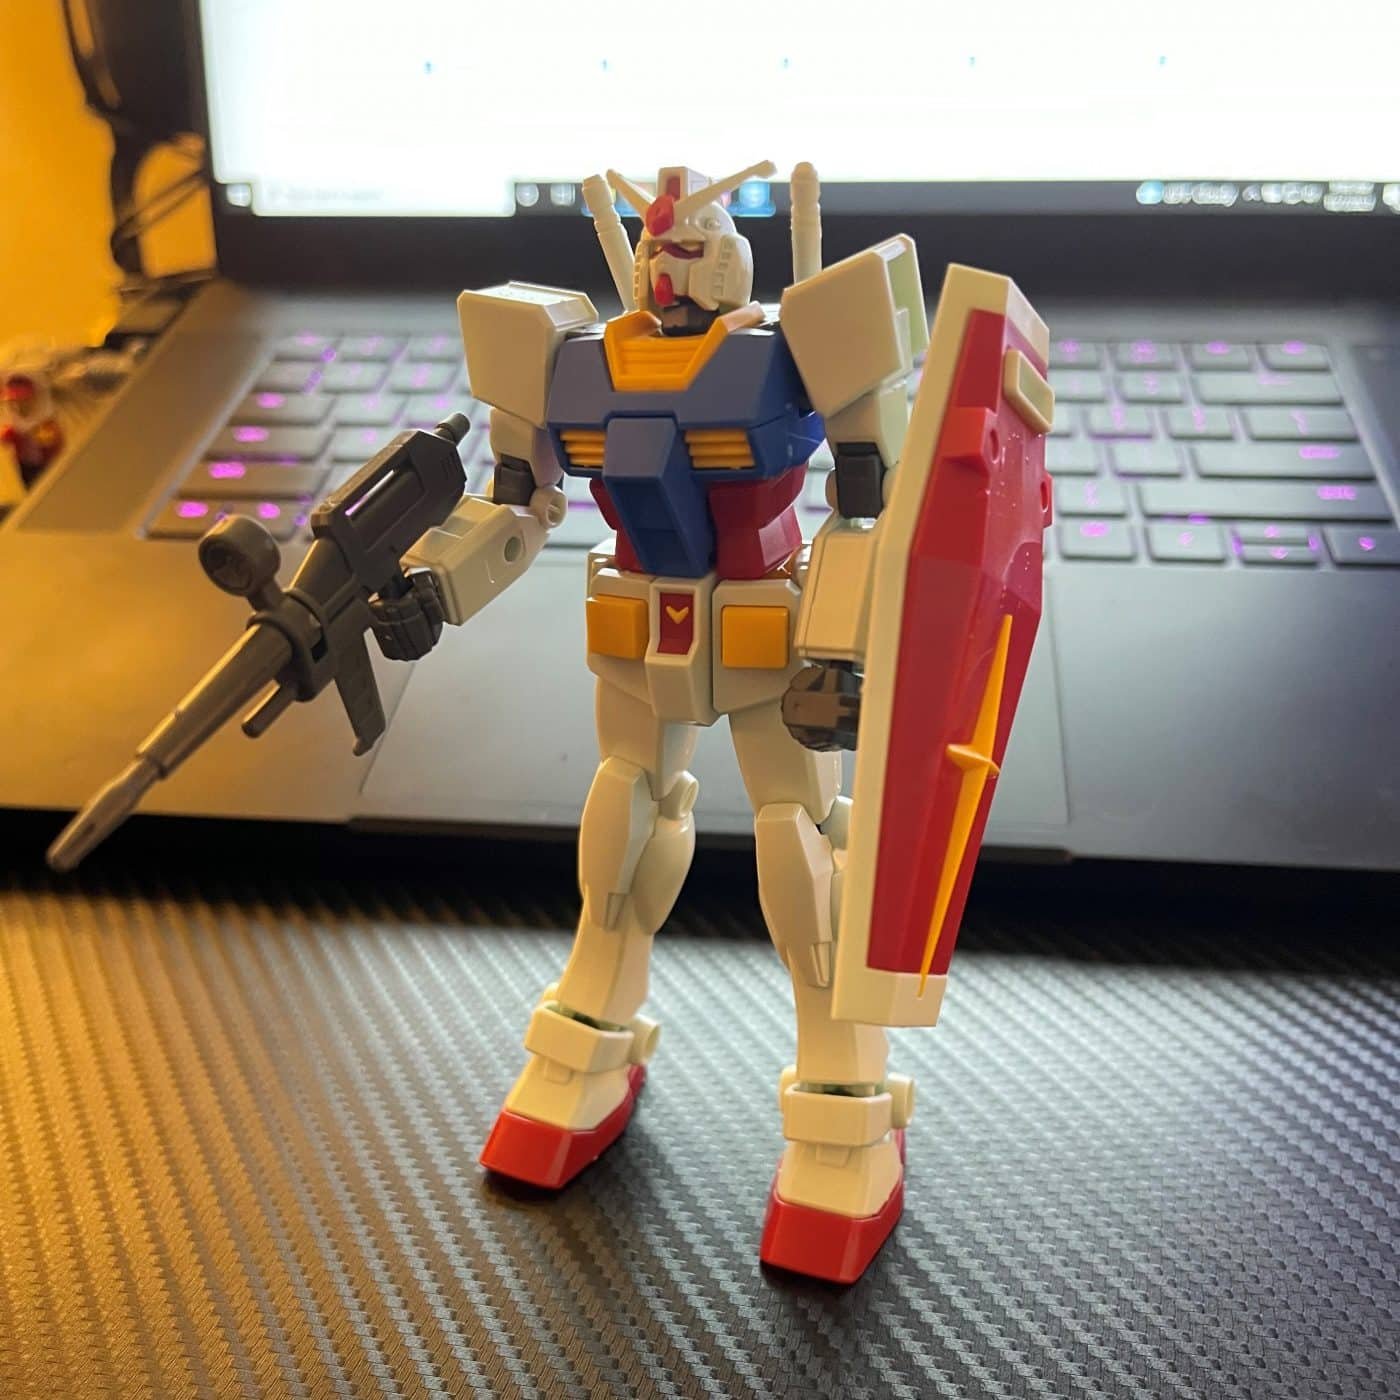 An entry grade gundam stands on a desk in front of a laptop